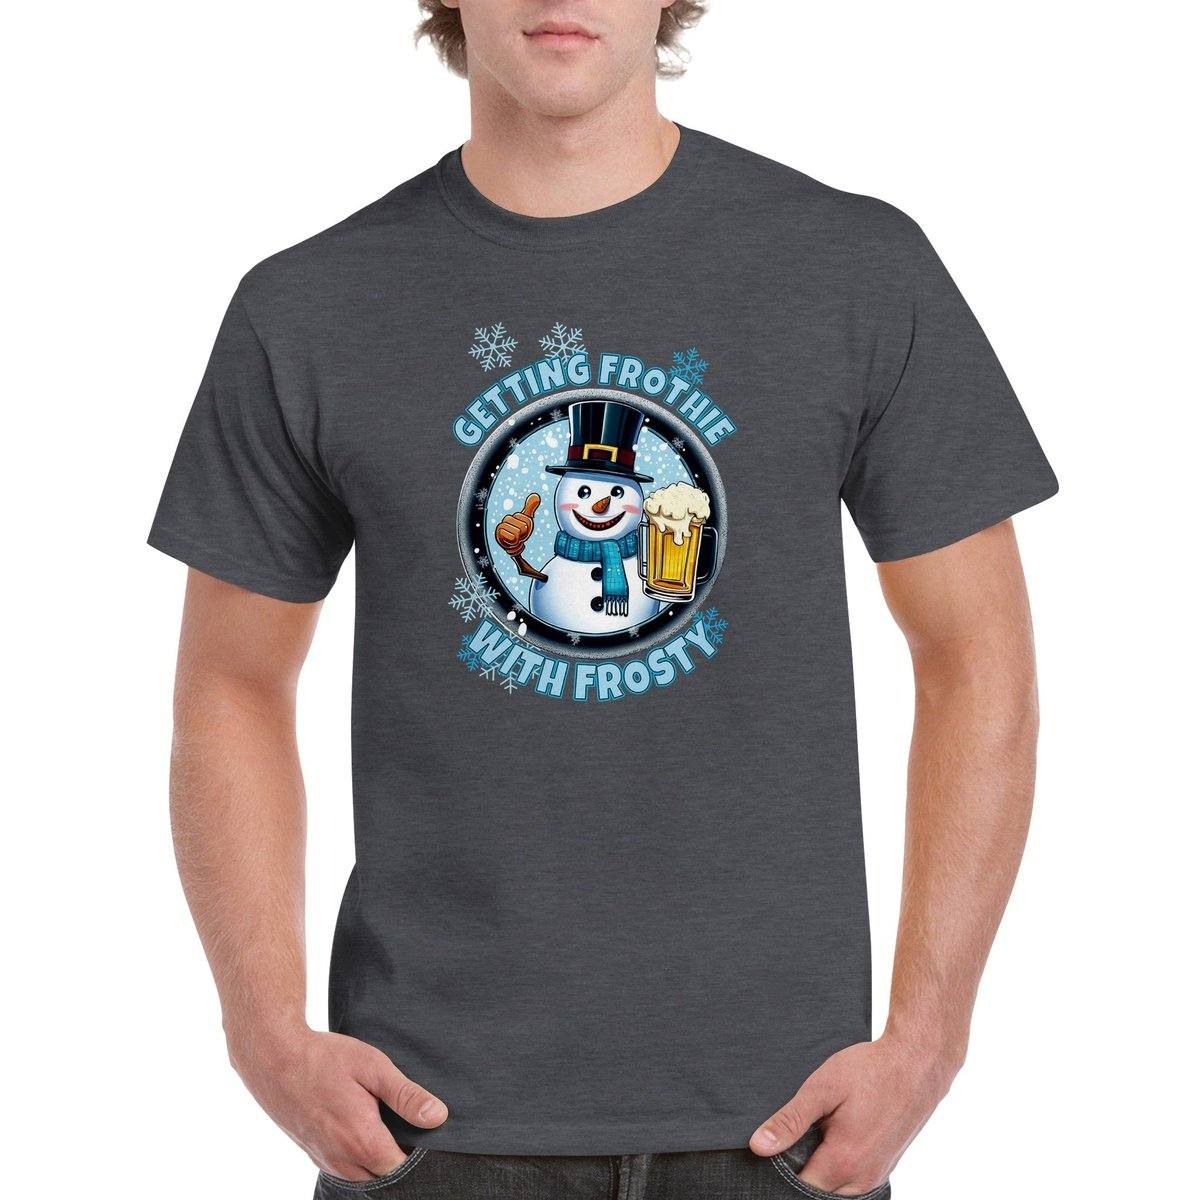 Getting Frothie With Frosty T-SHIRT Australia Online Color